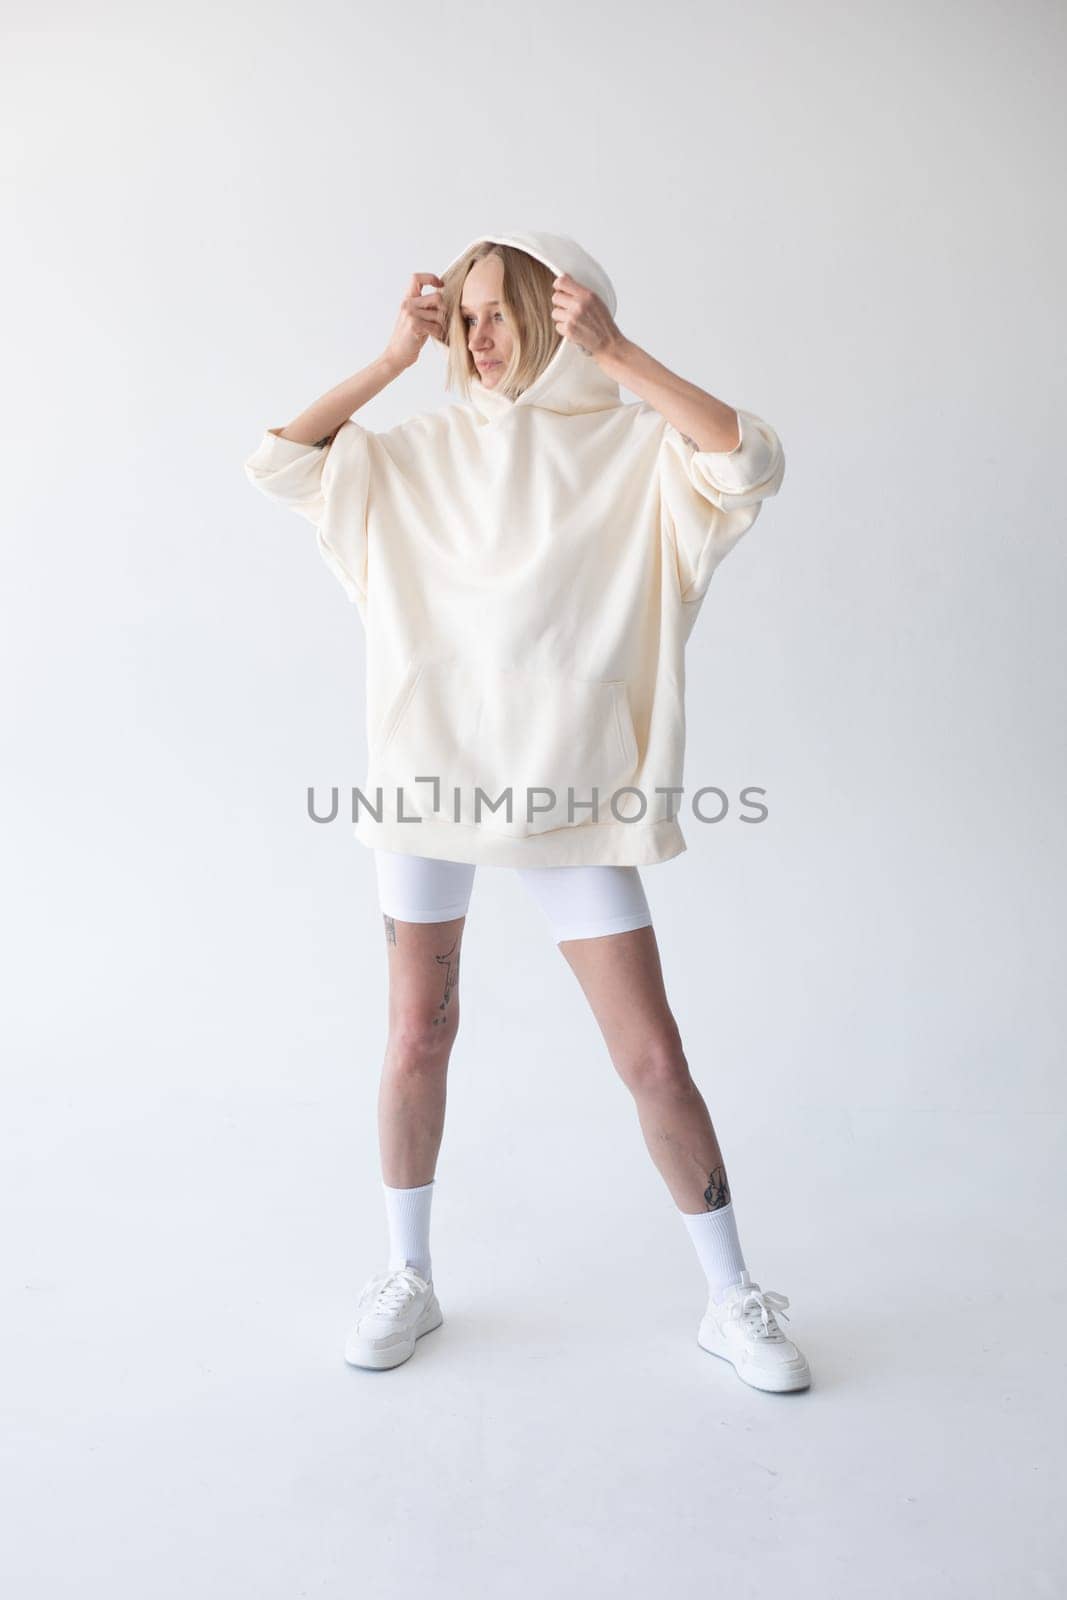 Beautiful blonde woman posing in white hoodie and leggings posing against white background. High quality photo